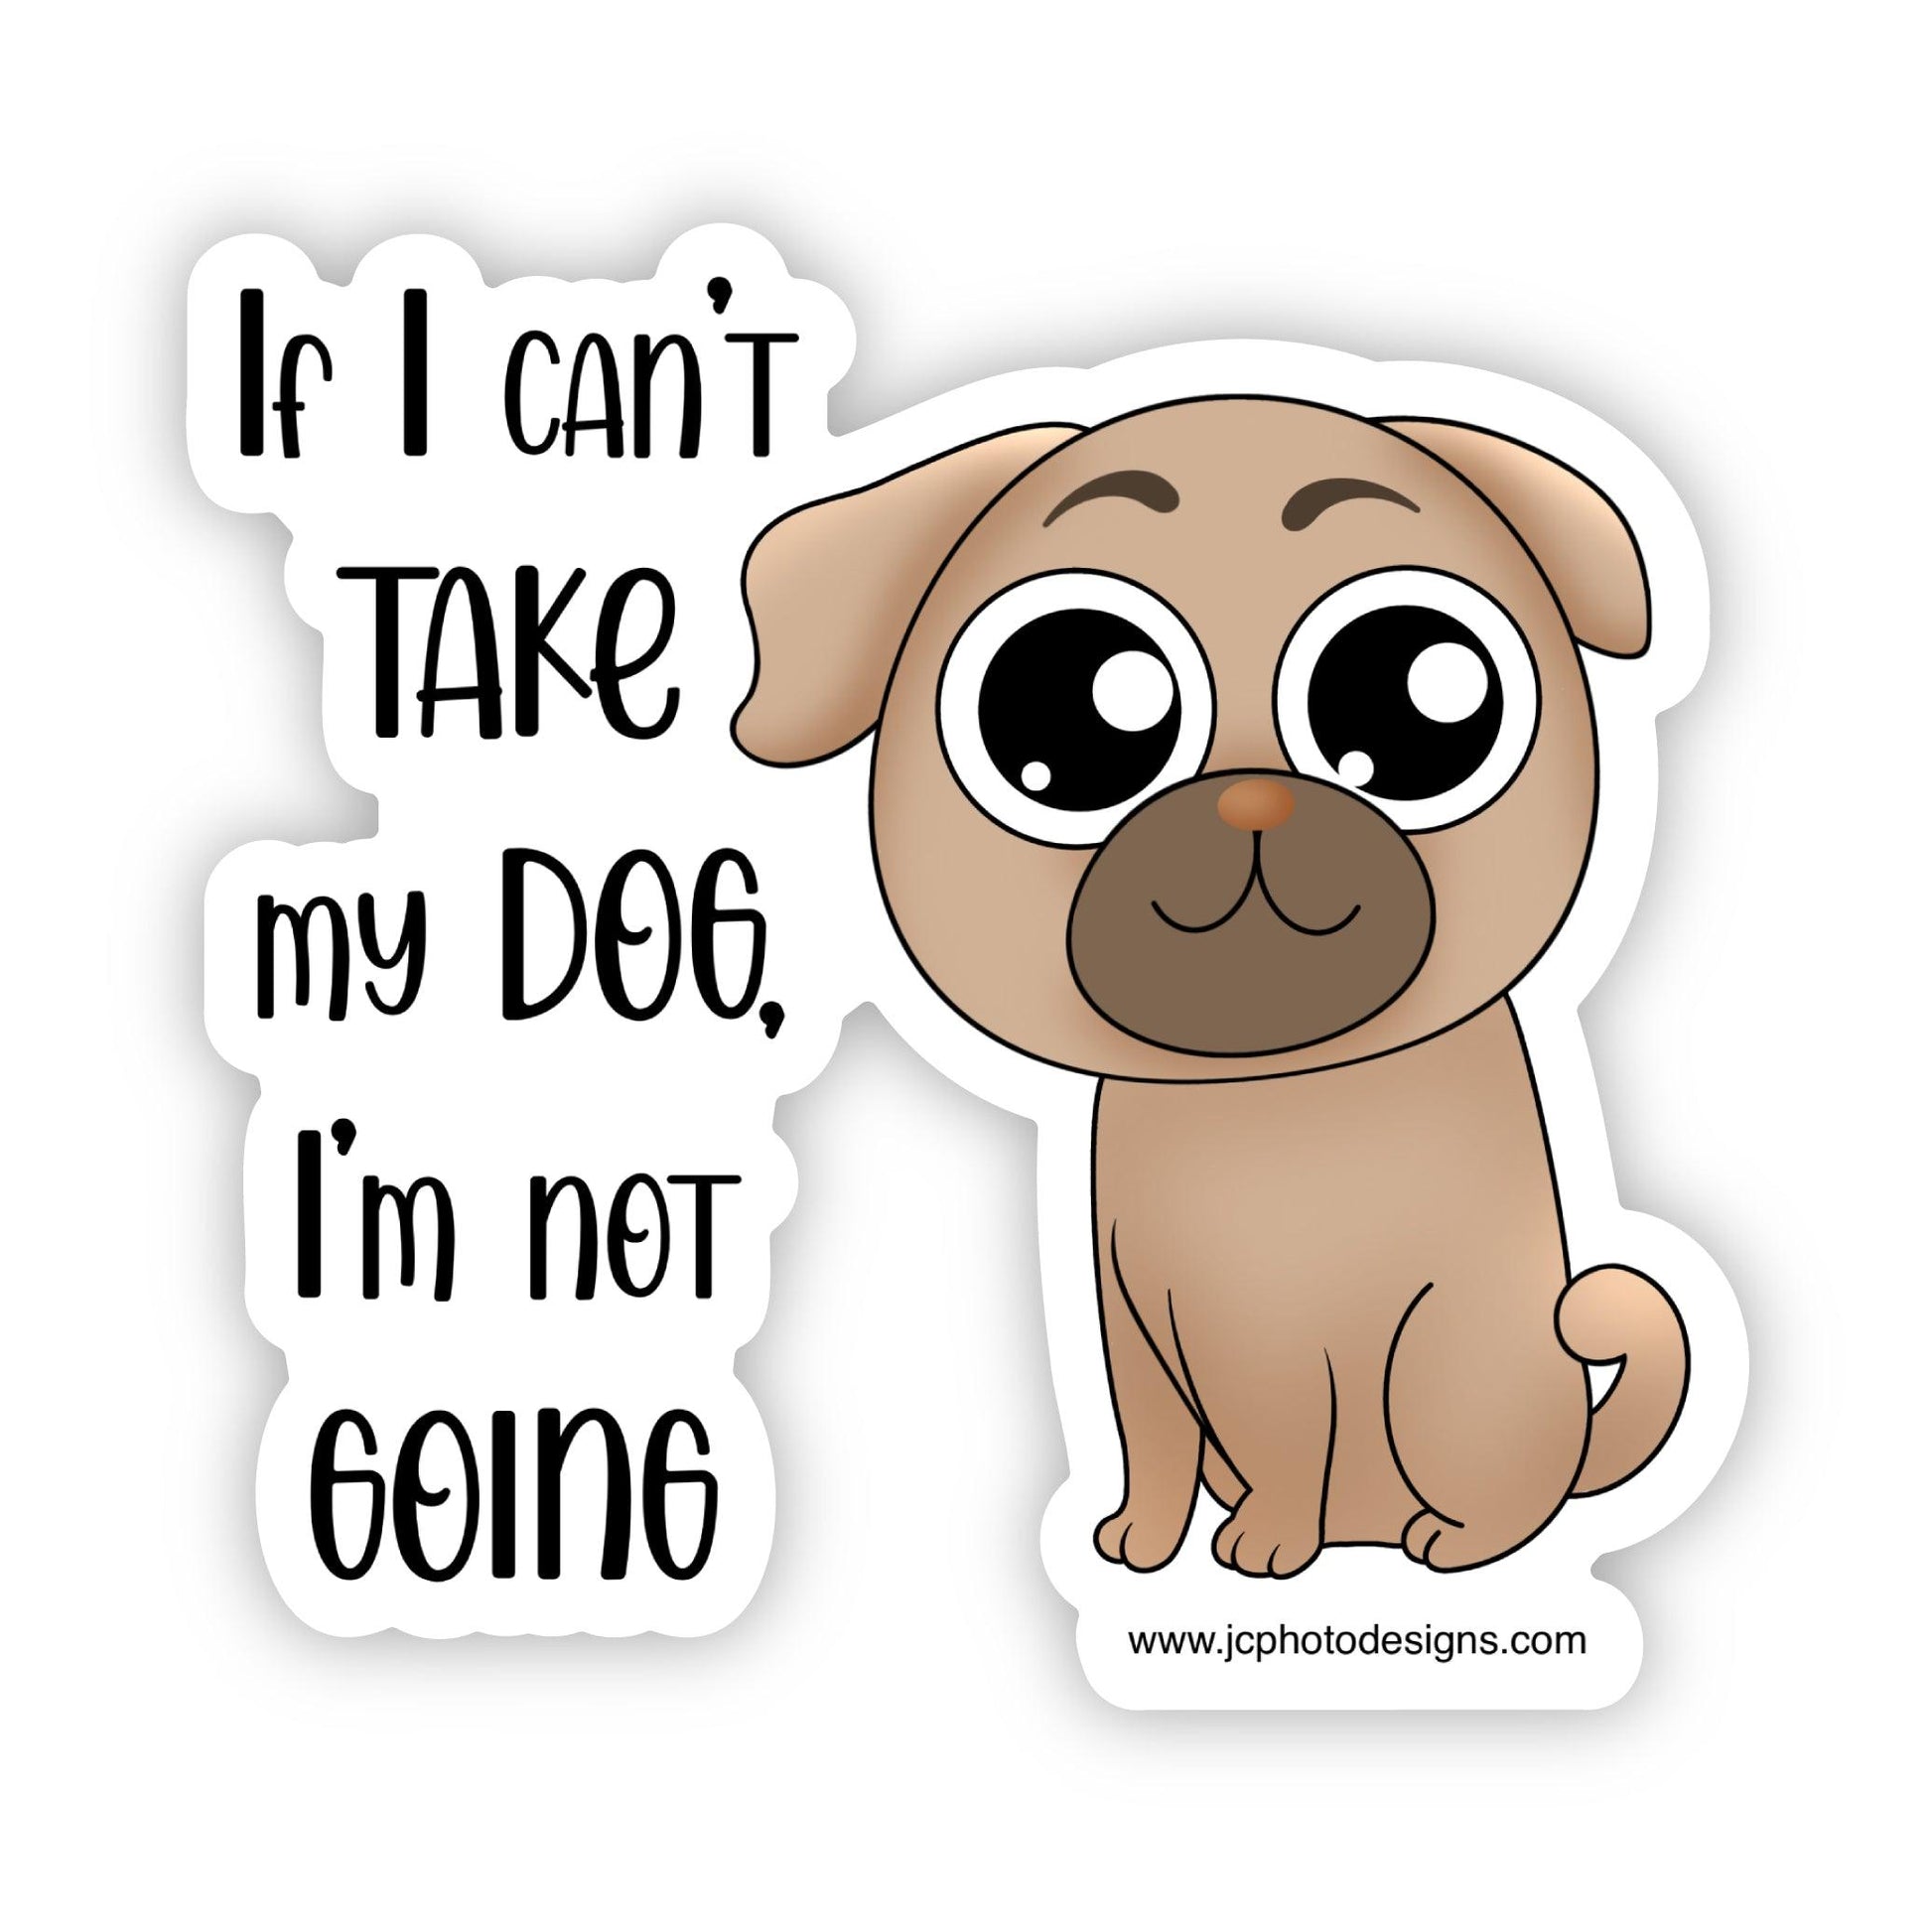 'If I Can't Take my Dog, Then I'm not Going' Sticker for the dog lover - JC Designs